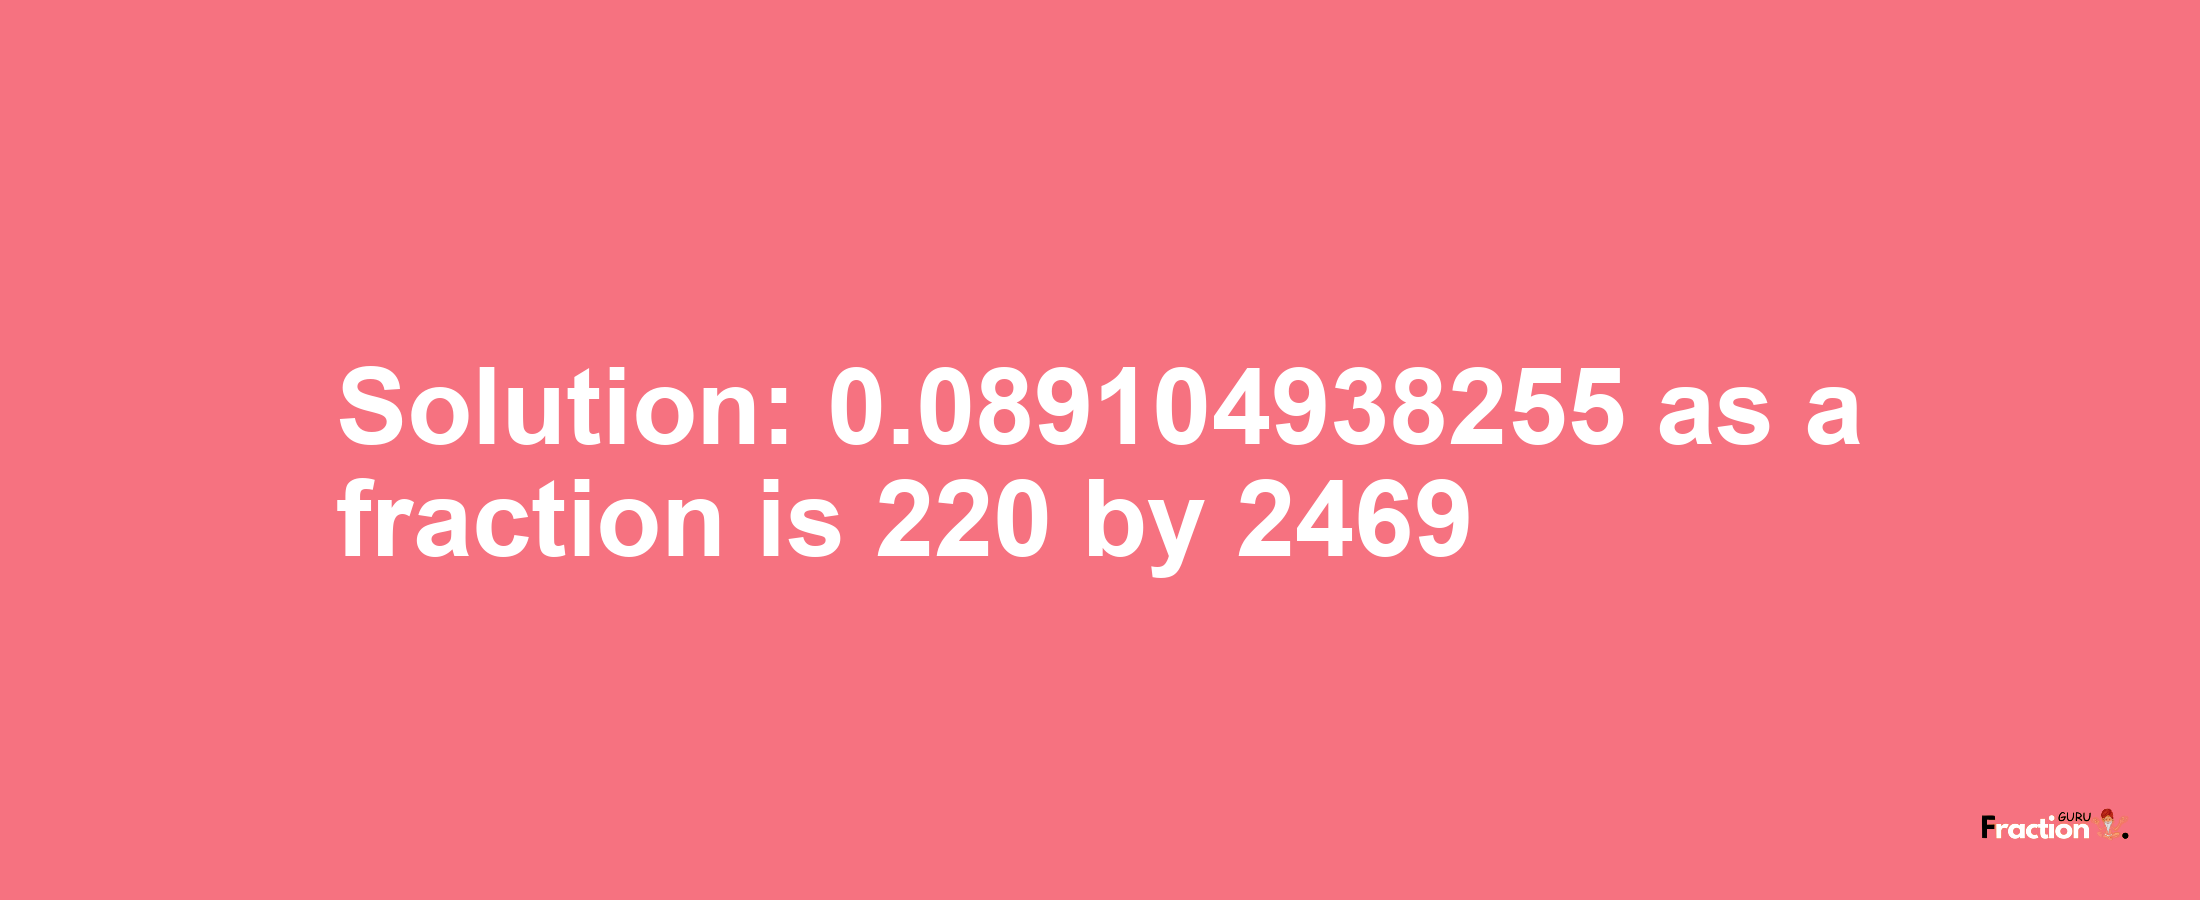 Solution:0.089104938255 as a fraction is 220/2469